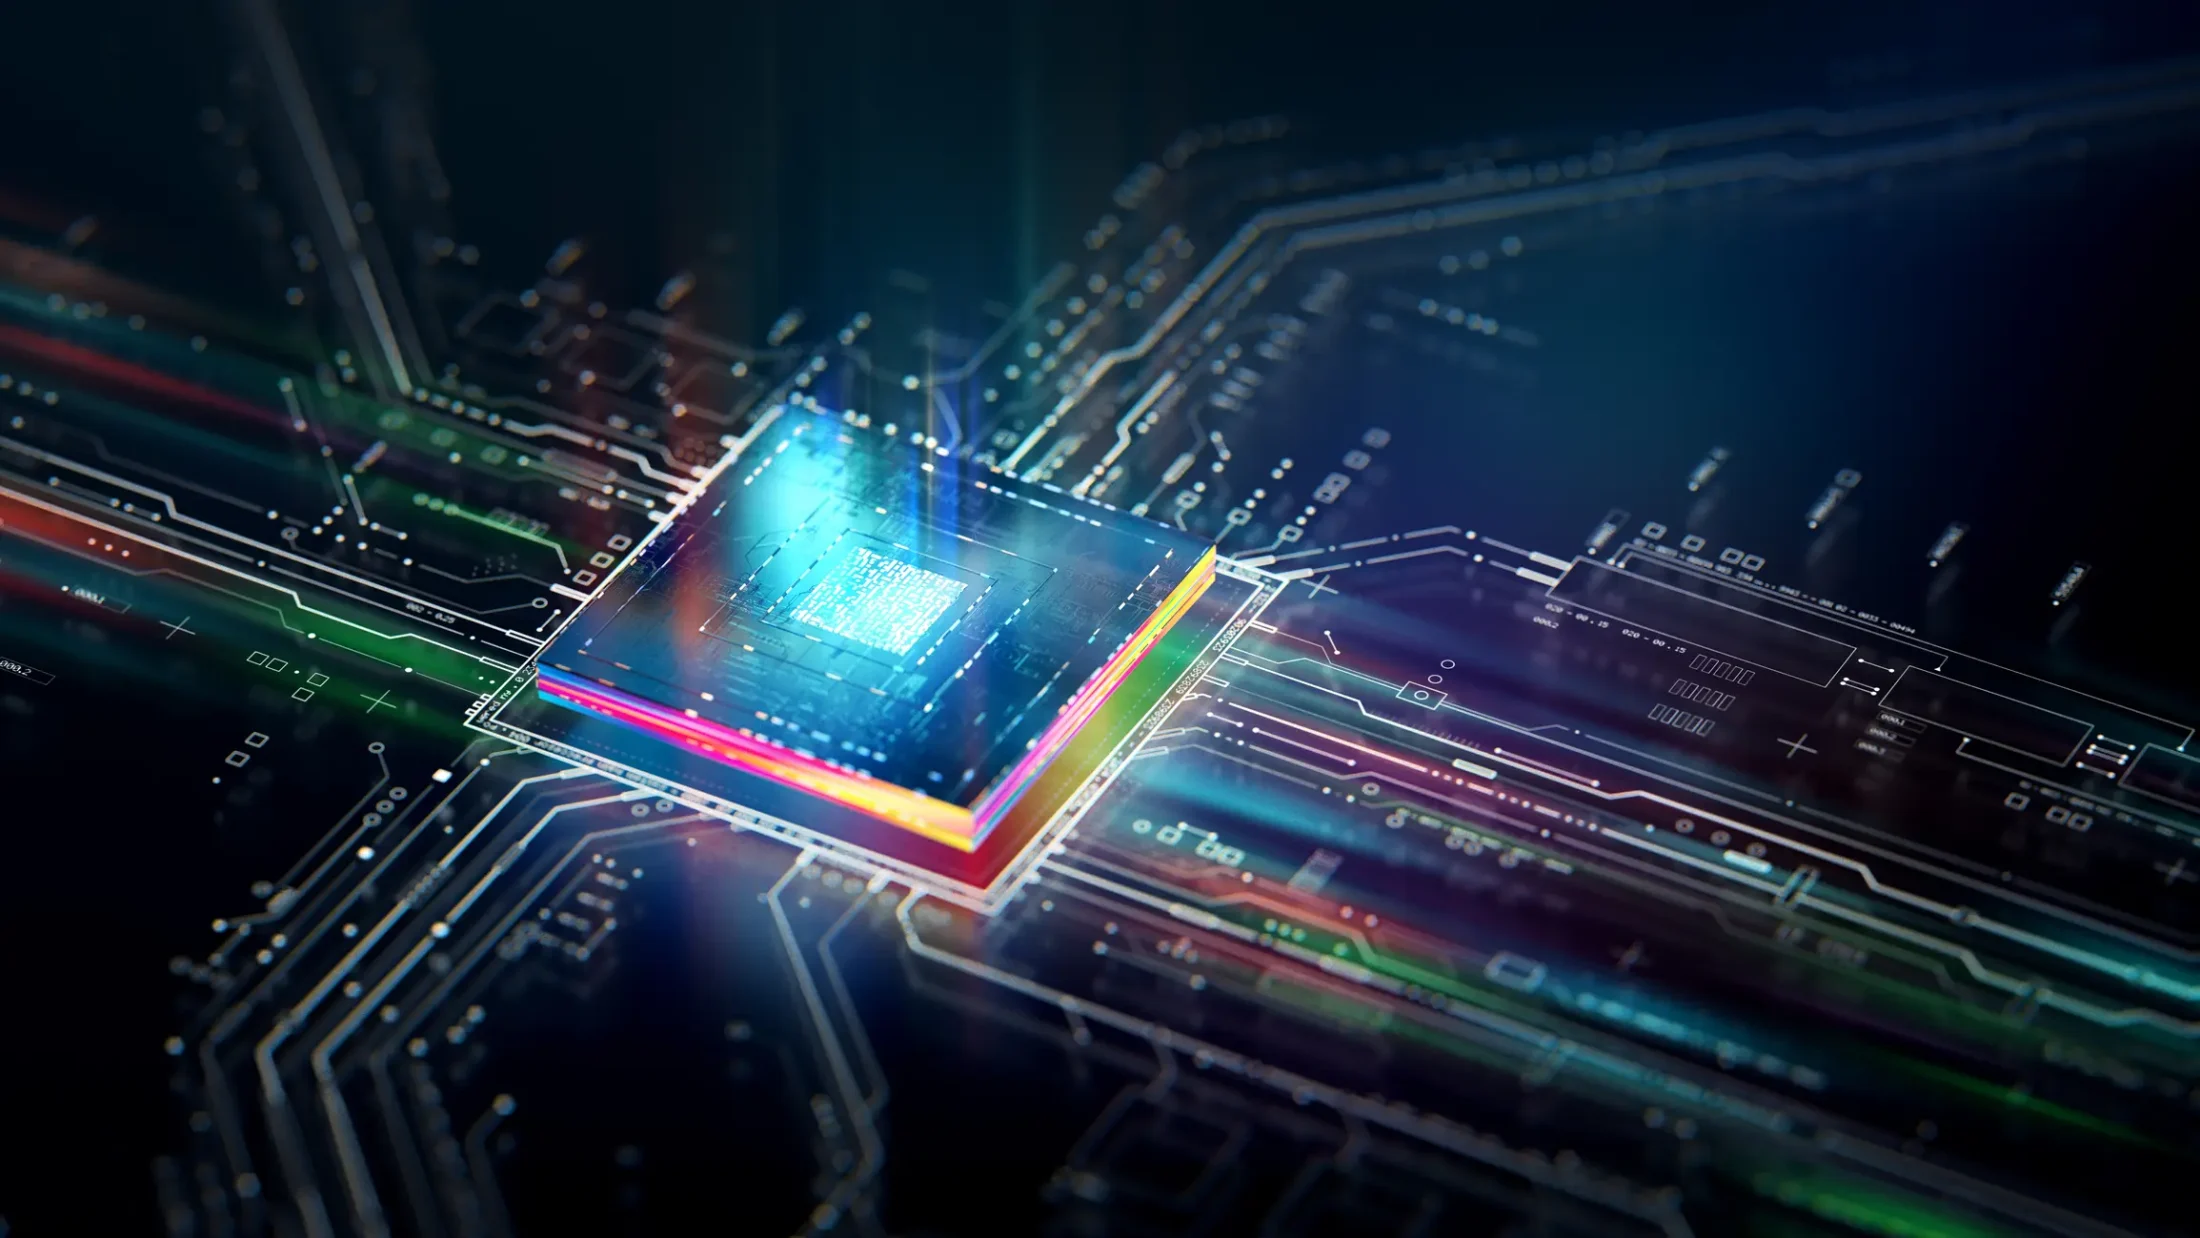 A brightly lit microchip is surrounded by colorful circuitry pathways, representing an electronic circuit board.